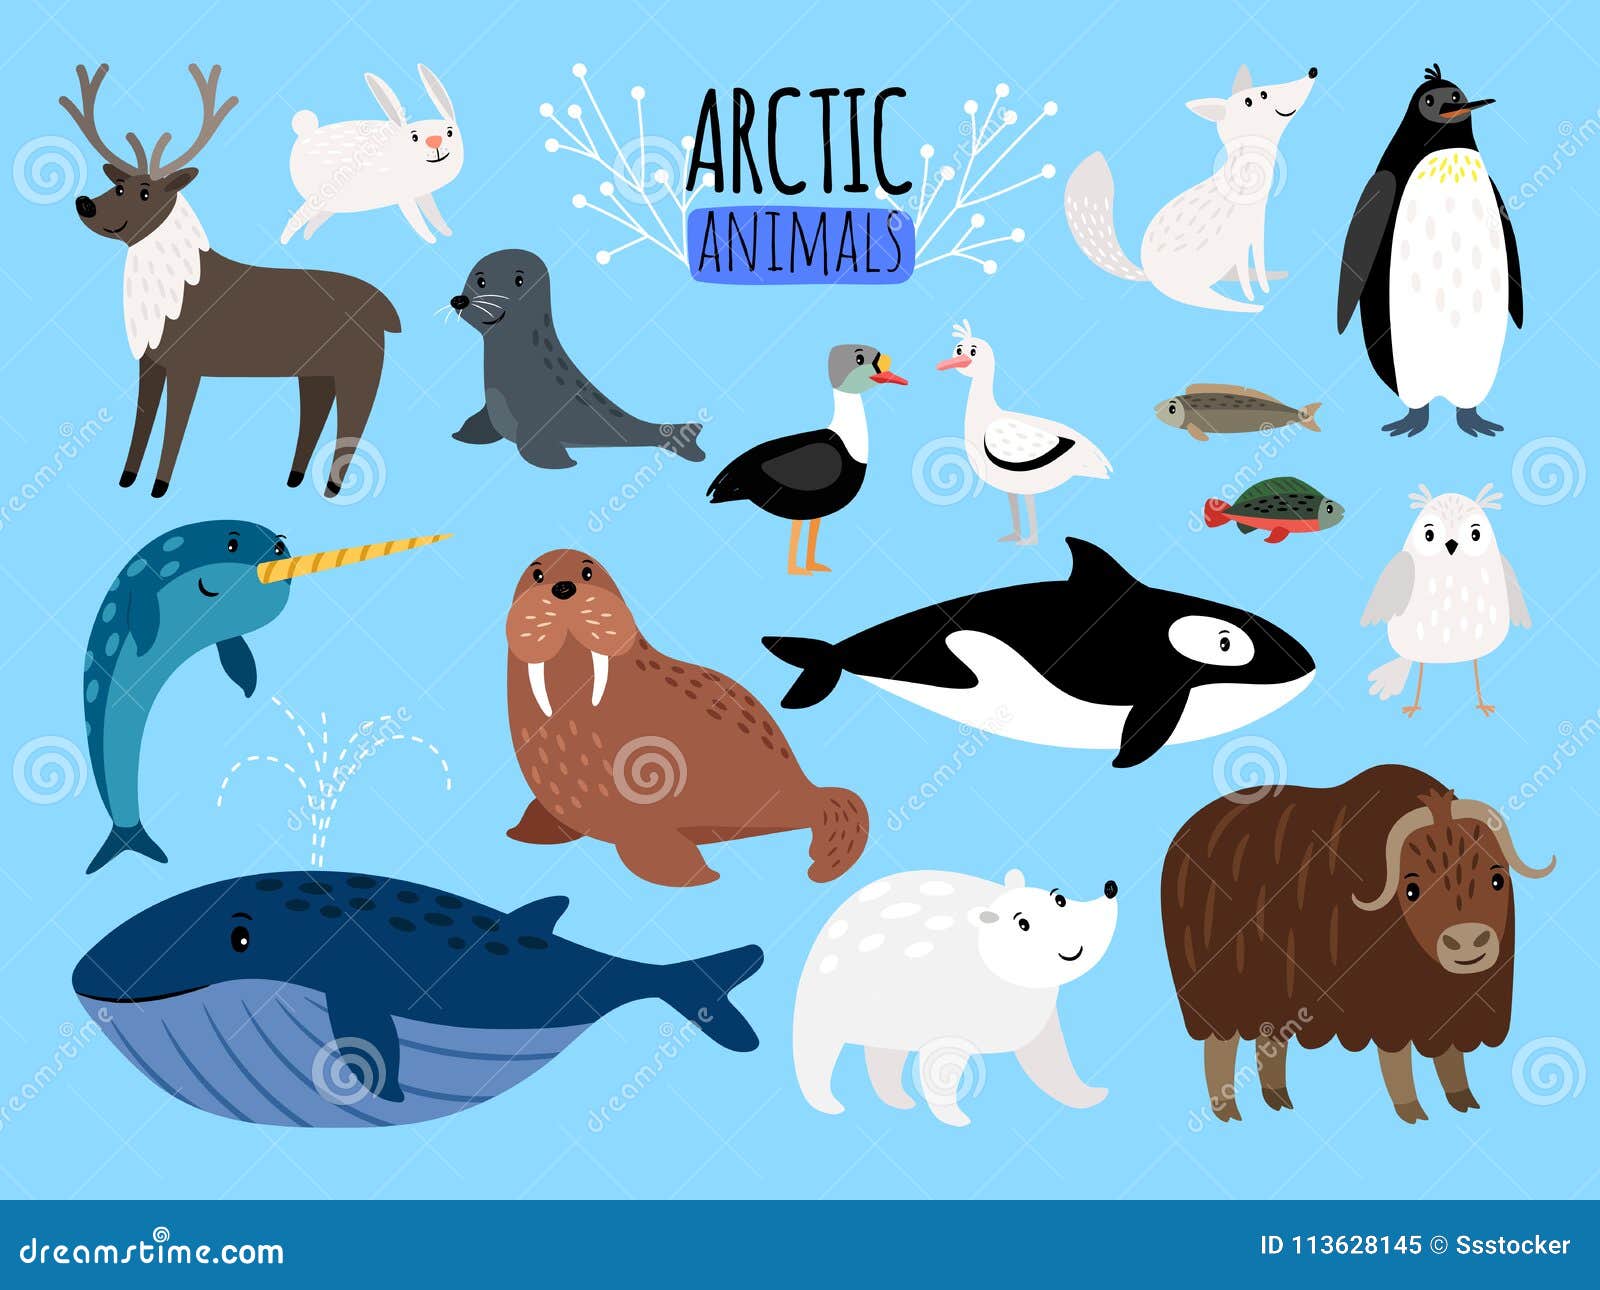 Arctic Animals. Cute Animal Set of Arctic or Alaska Vector Illustration for  Education, Penguin and Polar Bear Stock Vector - Illustration of dolphin,  bison: 113628145